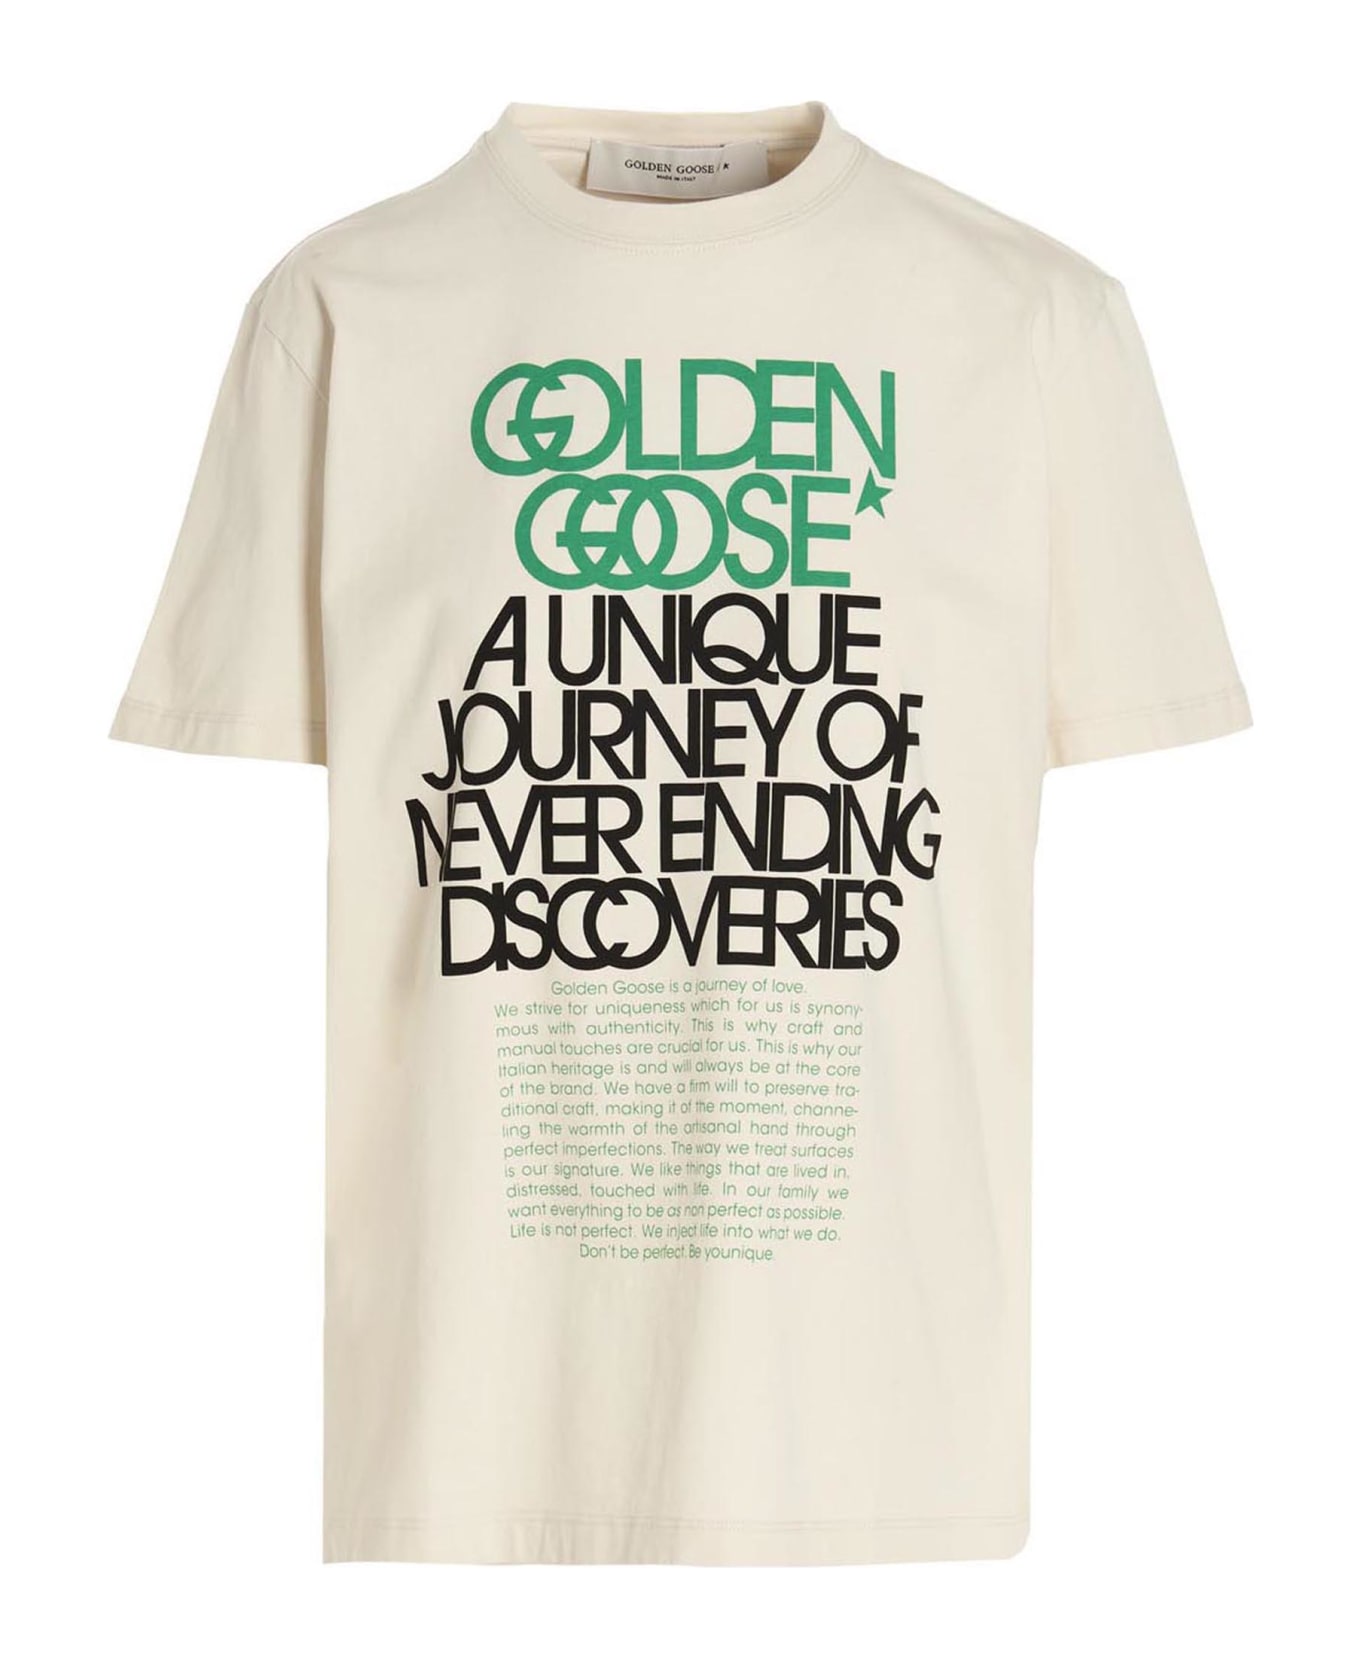 Golden Goose 'a Unique Journey Of Never Ending Discoveries  T-skirt - White